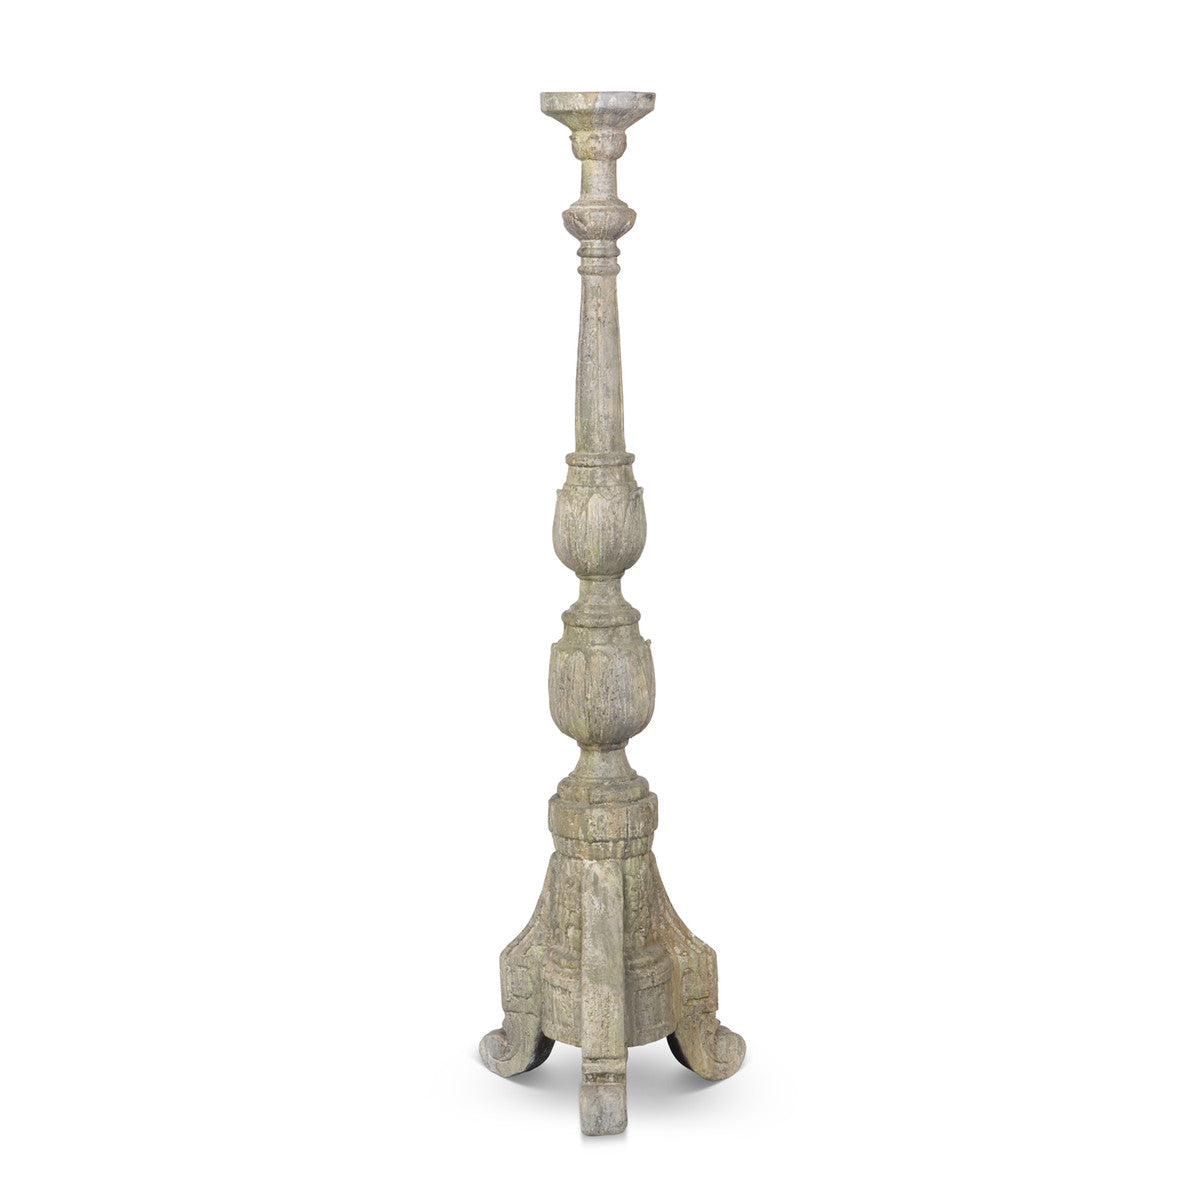 Courtyard Tall Candle Holder-Candle Holders-tbgypsysoul